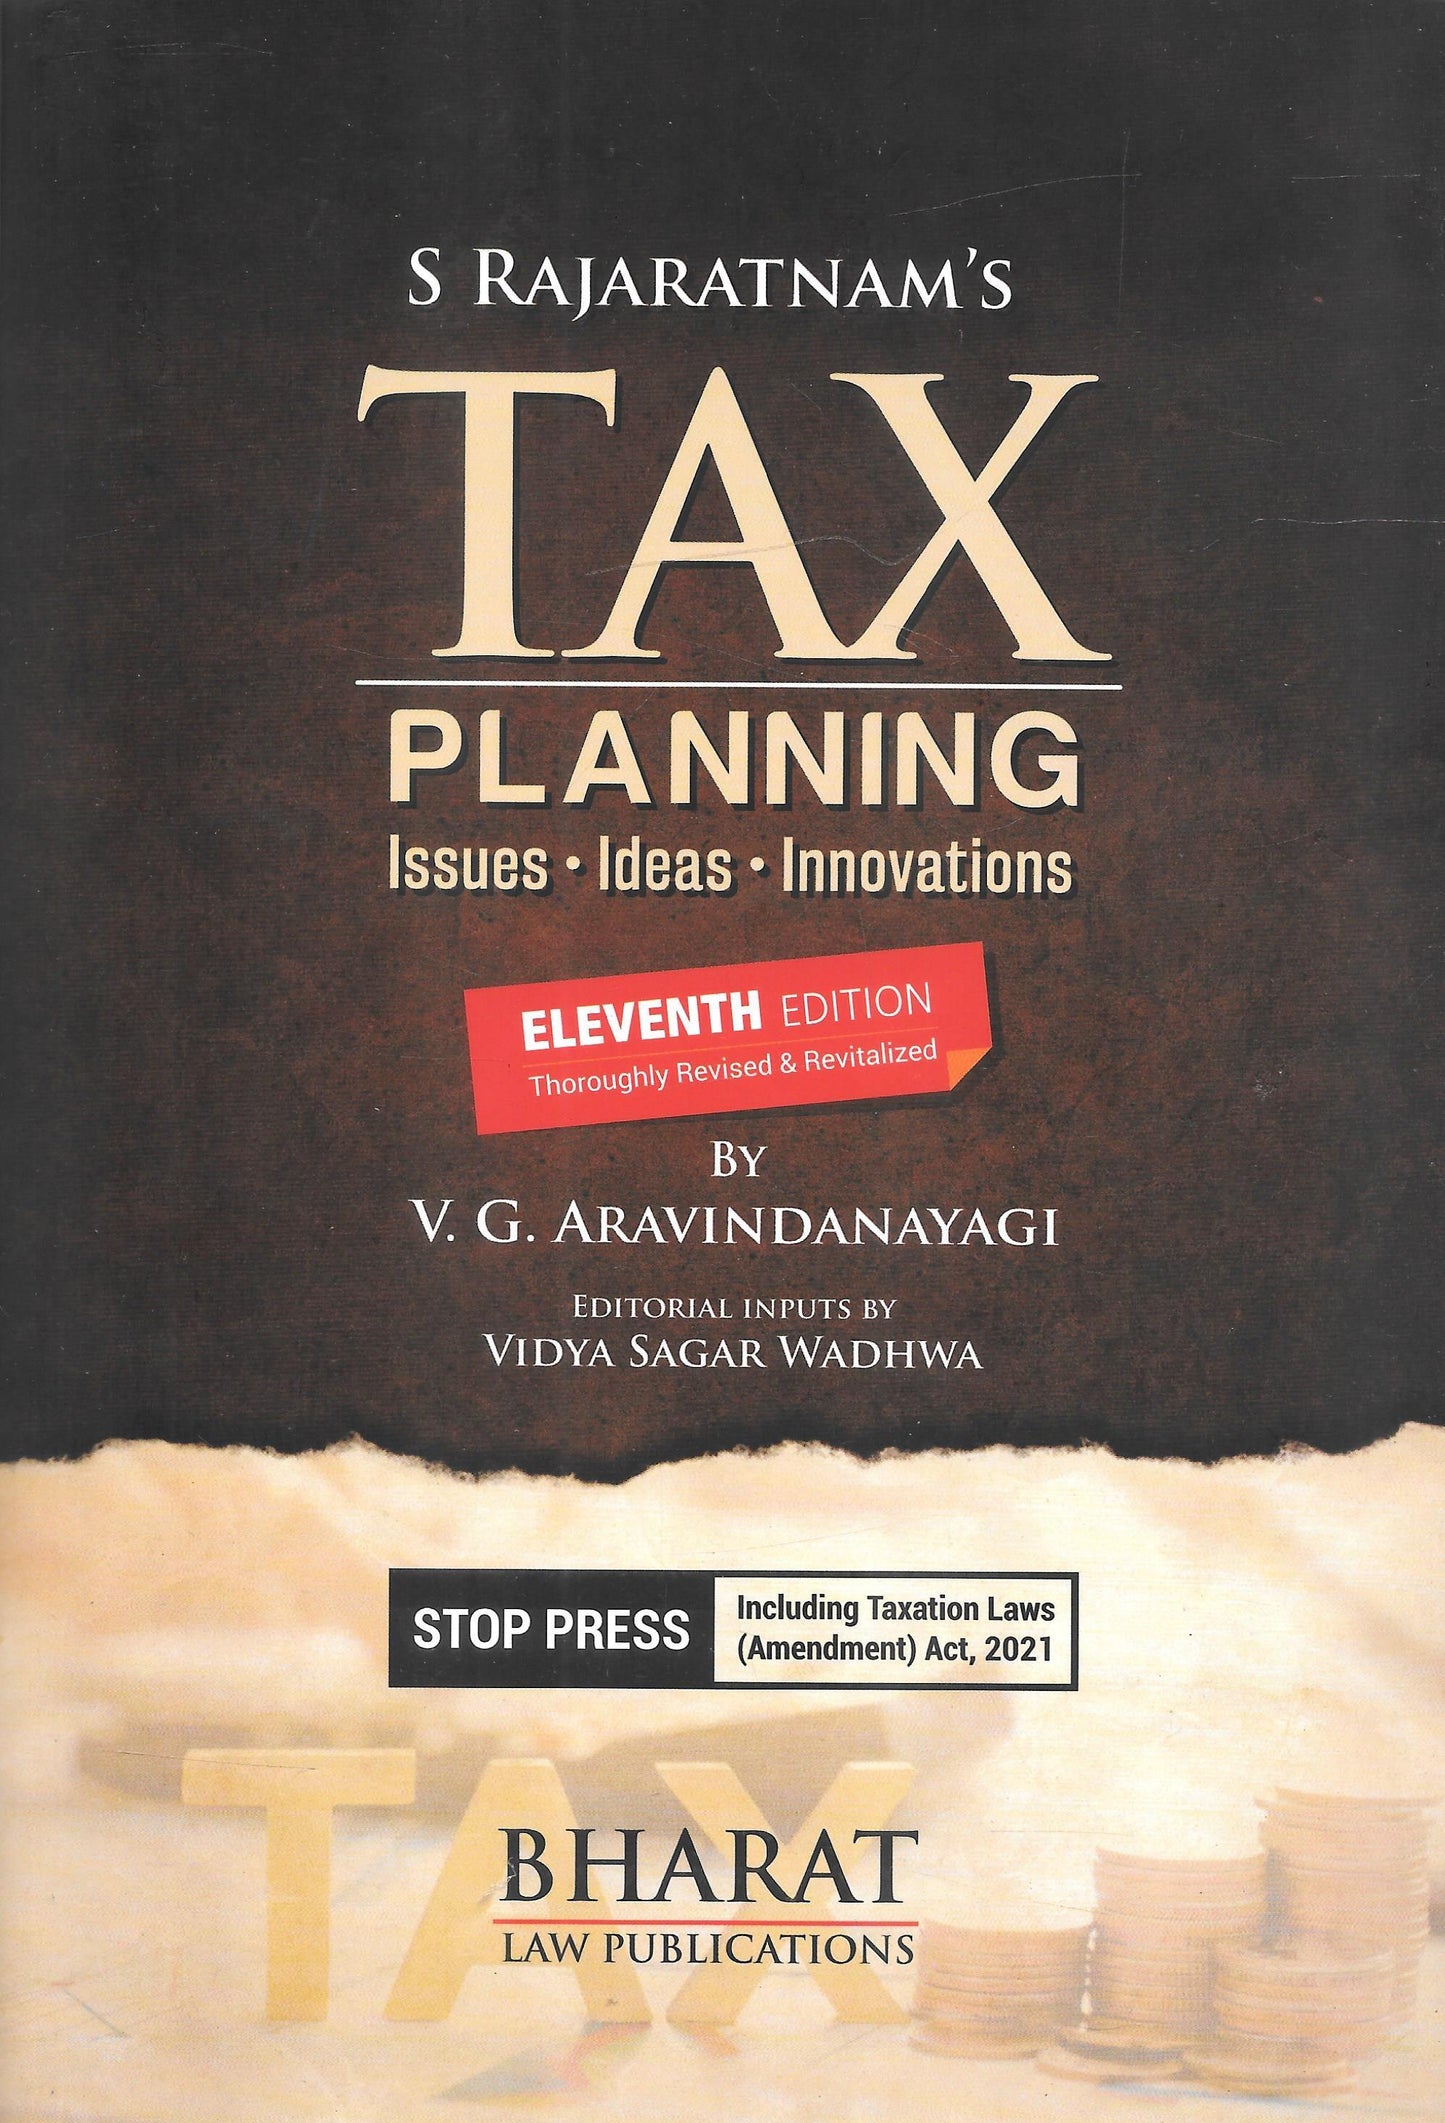 Tax Planning (As Amended by The Finance Act, 2021) - M&J Services